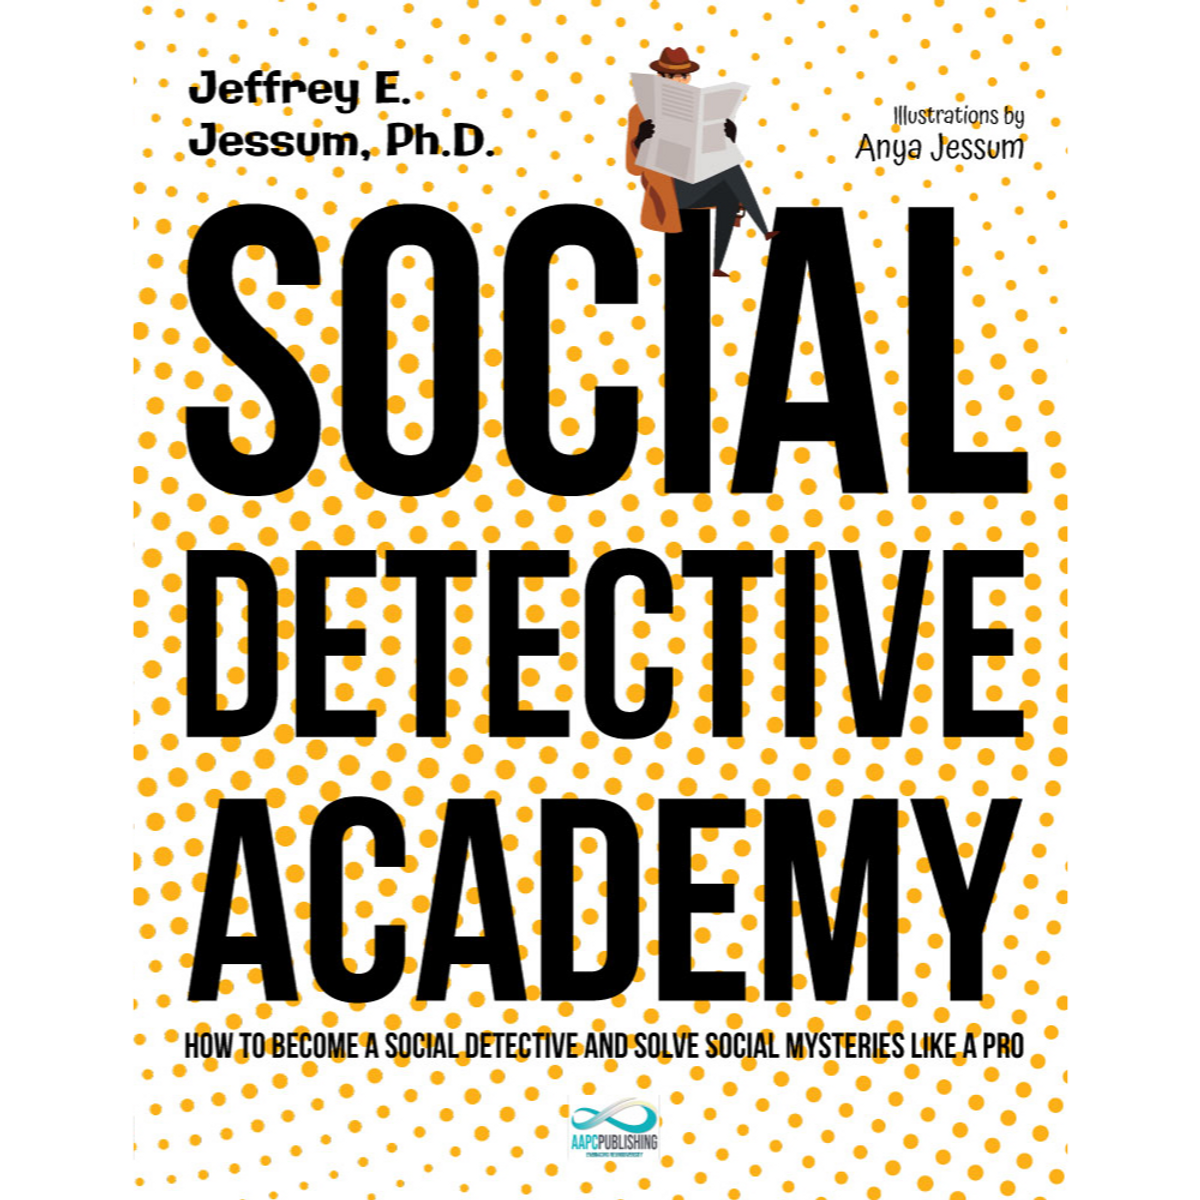 Social Detective Academy: How to Become a Social Detective and Solve Social Mysteries Like a Pro